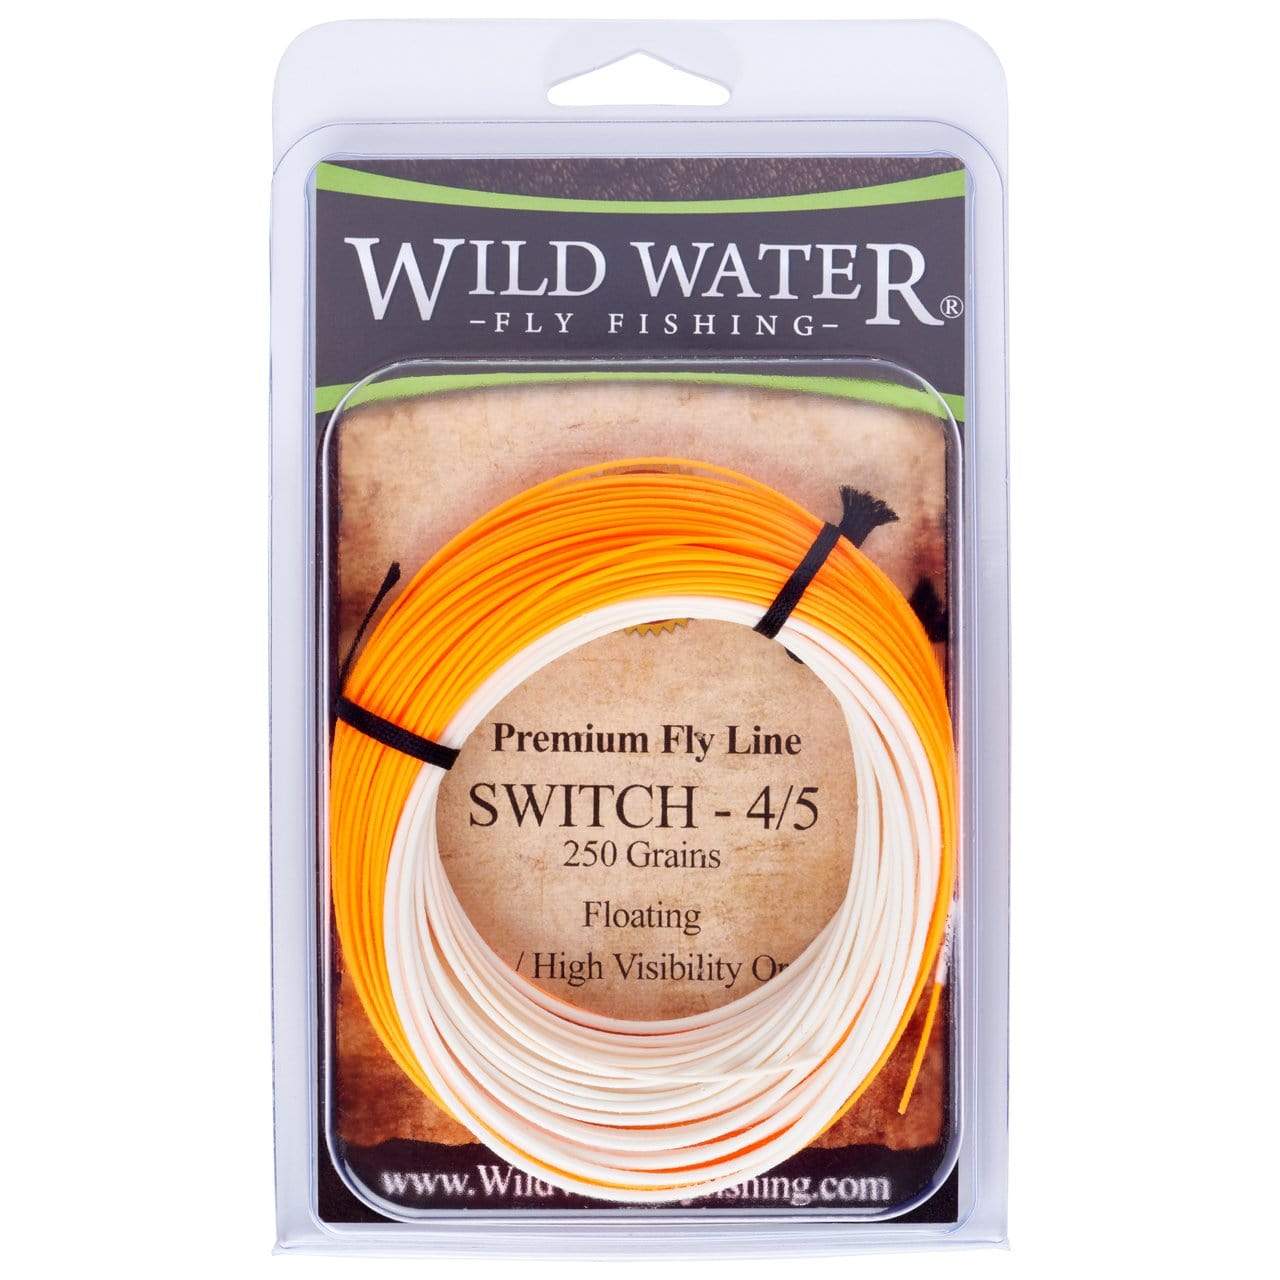 Wild Water Fly Fishing 4/5F Switch Line, 250 grains